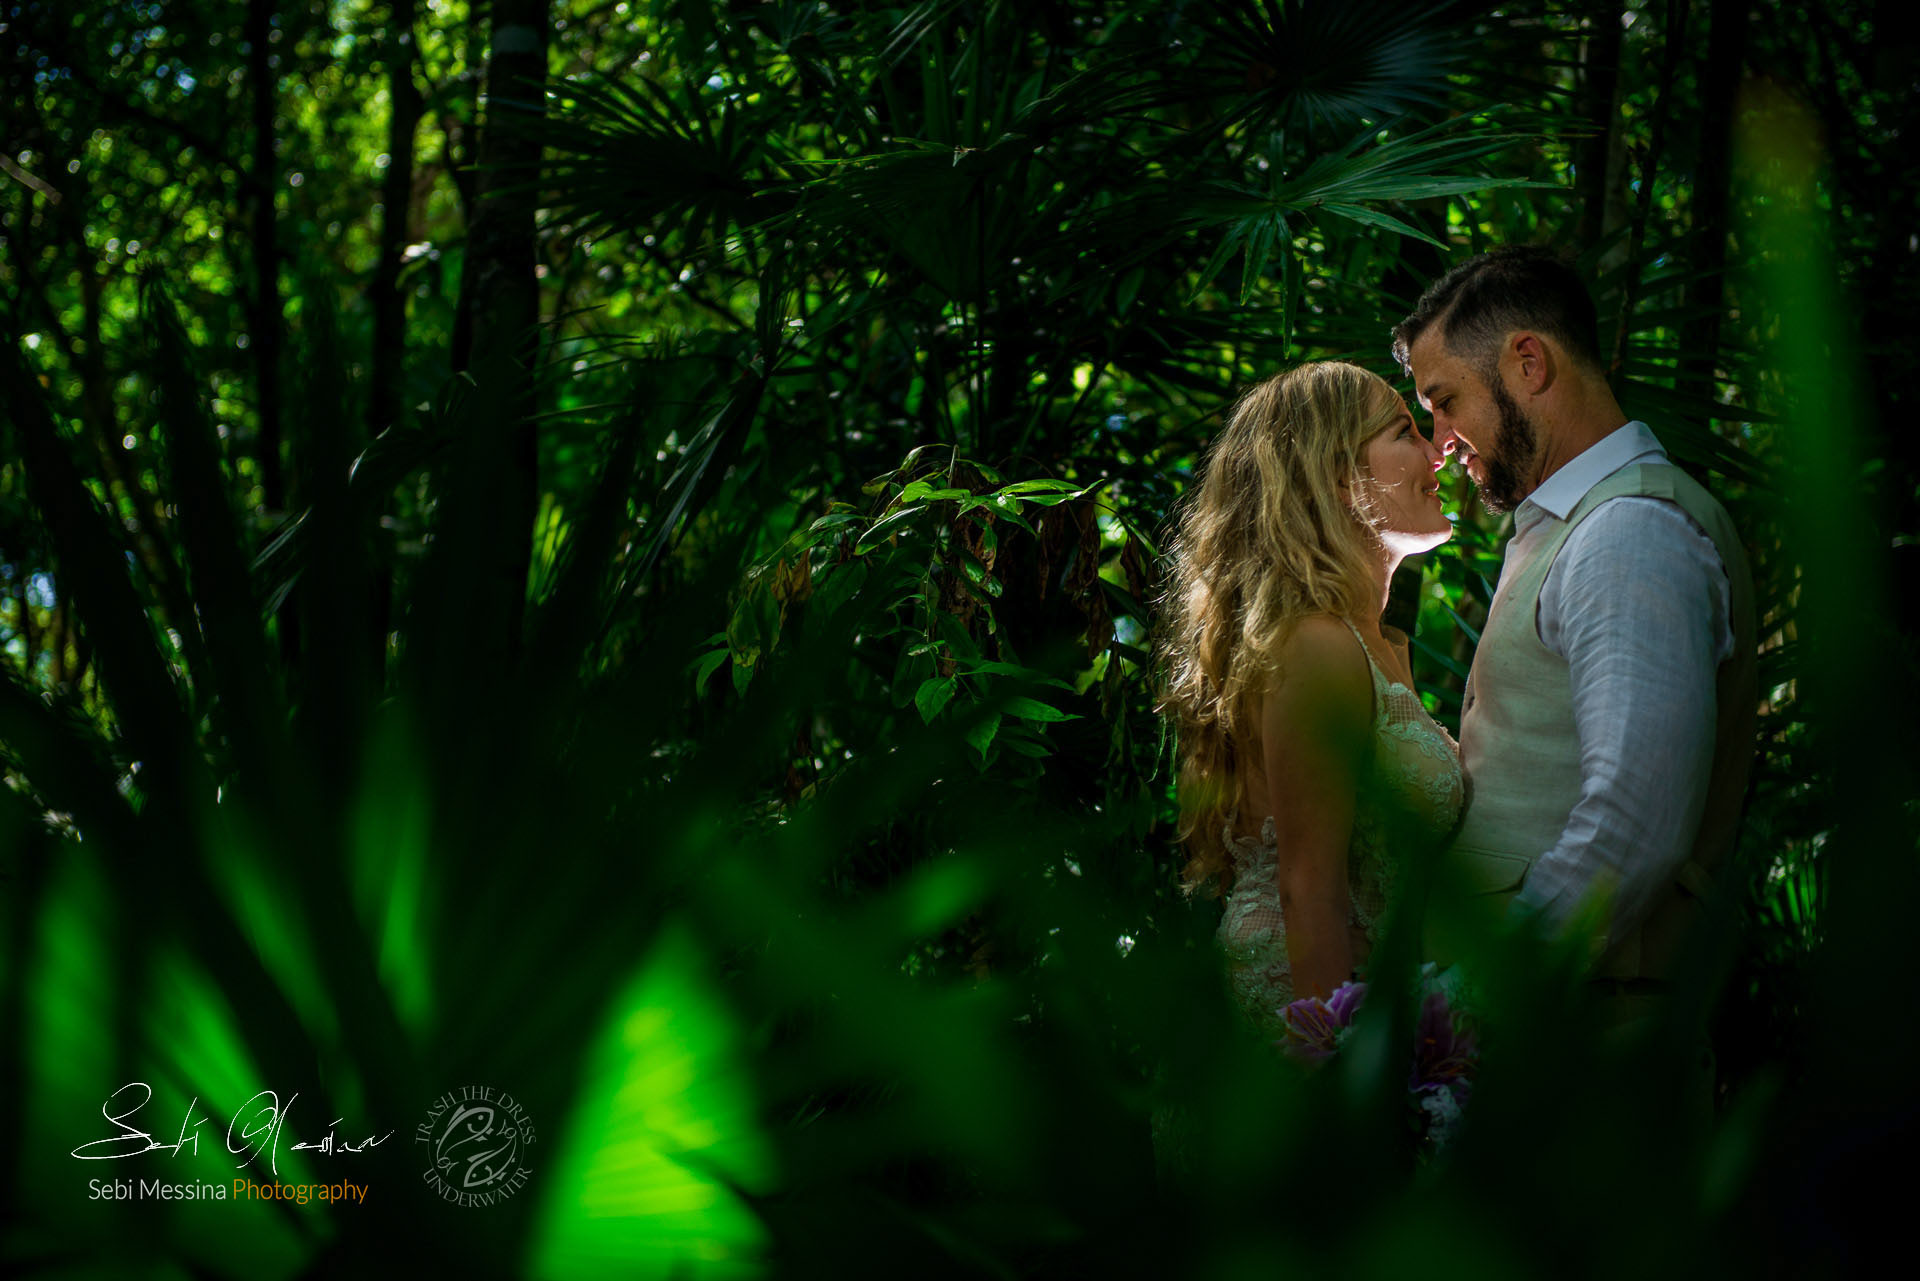 Underwater Trash The Dress in a Mexican cenote – Sebi Messina Photography